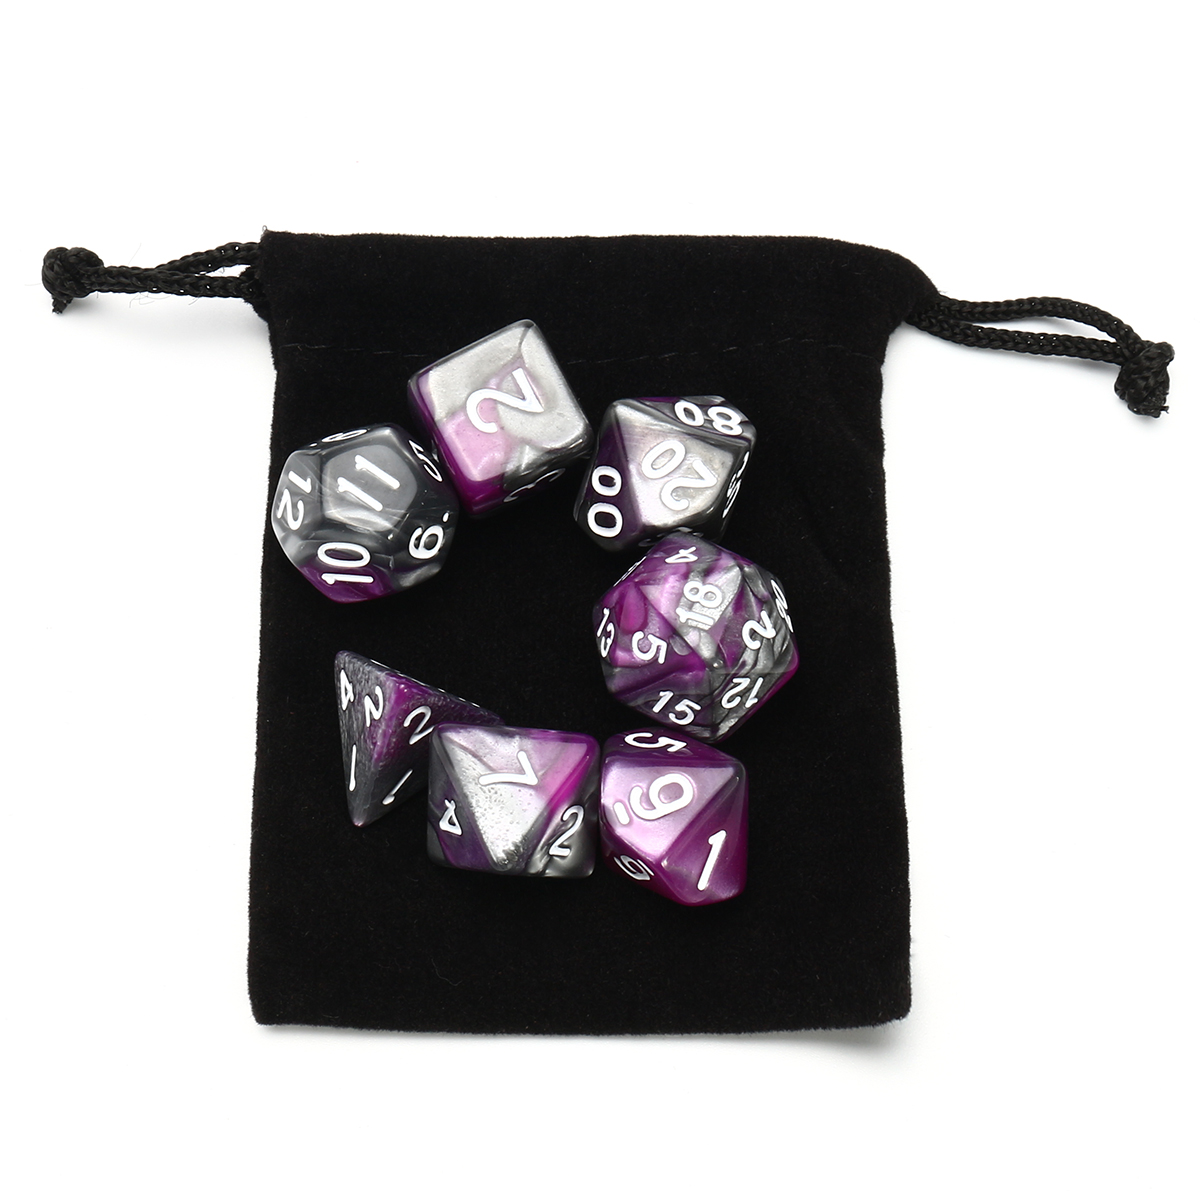 7Pcs-Purple-Gemini-Acrylic-Polyhedral-Dice-For-Dungeons-Dragons-RPG-RPG-With-Bag-1303425-4